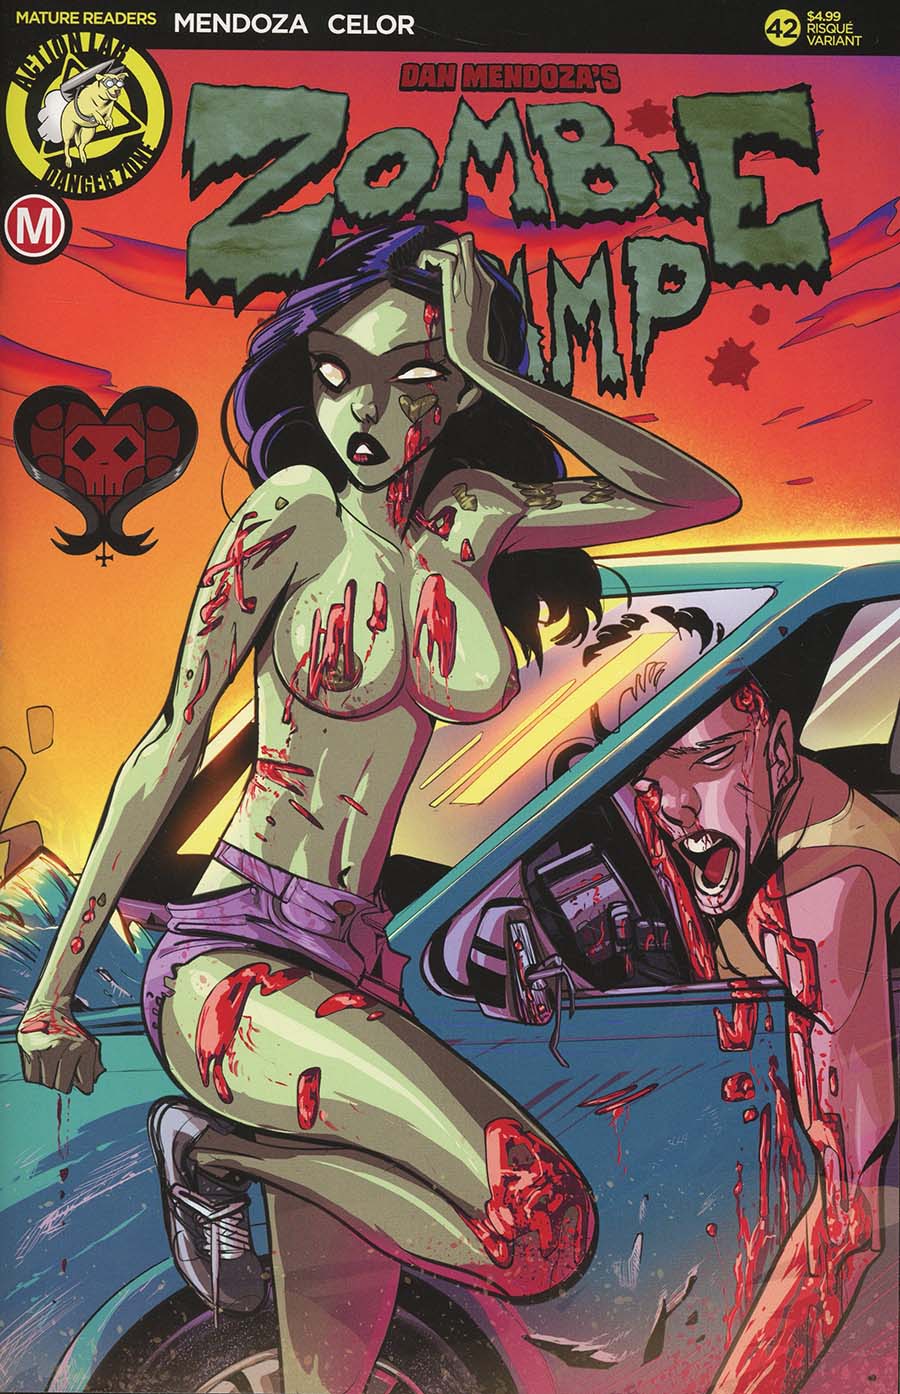 Zombie Tramp Vol 2 #42 Cover B Variant Celor Risque Cover